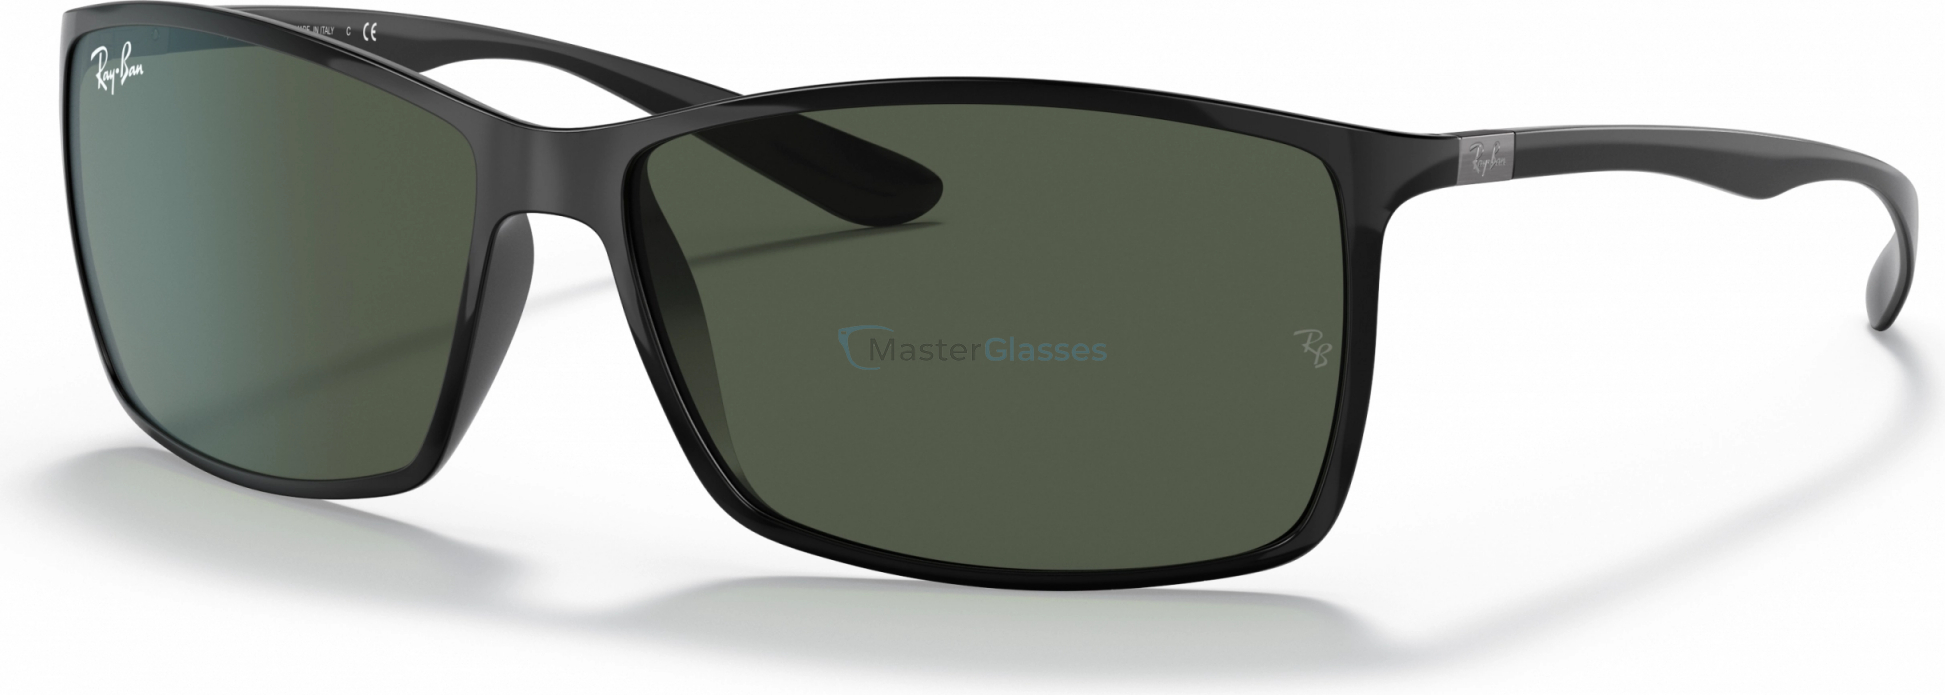 Ray-Ban Liteforce Tech RB4179 601/71